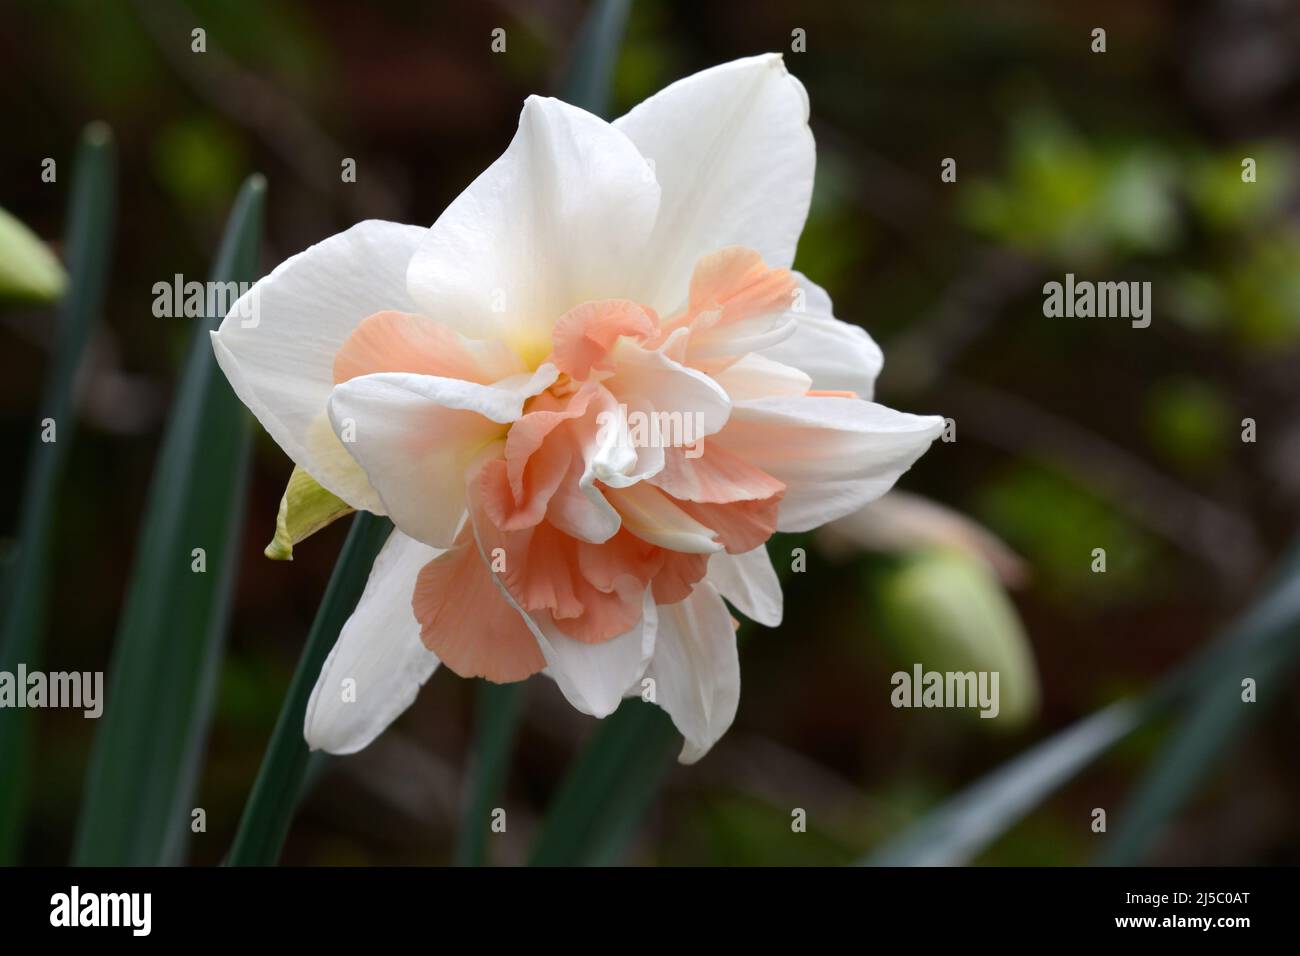 Narcissus Replete Daffodil Repleate flower bloom Stock Photo